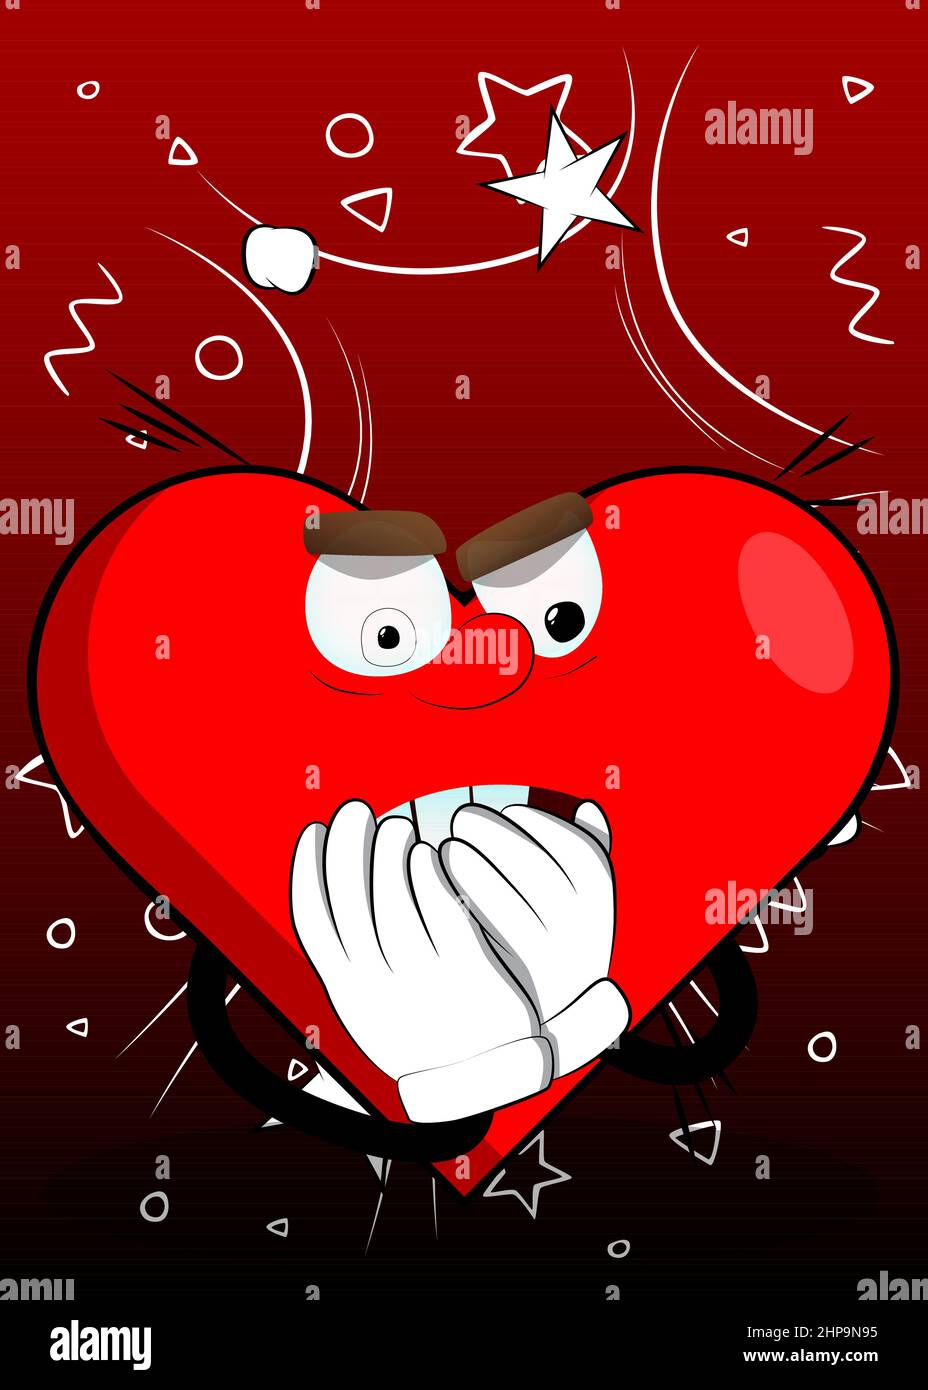 Heart Shape with hands over mouth as a cartoon character, funny red love holiday illustration. Stock Vector